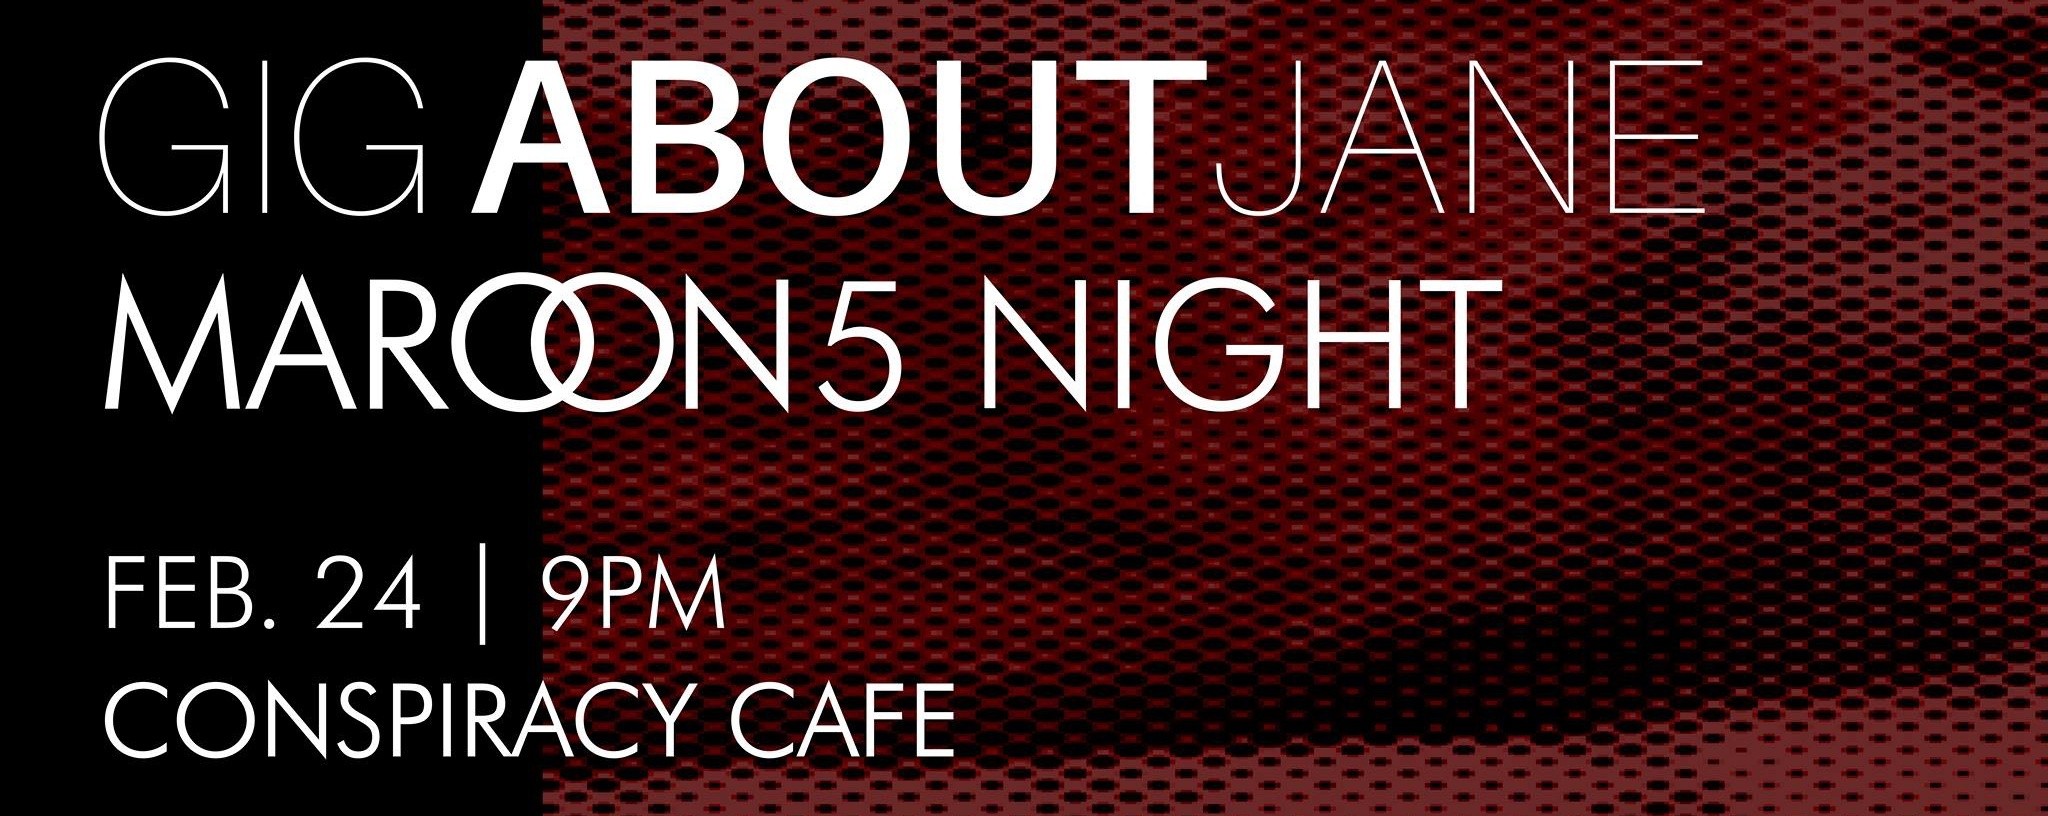 Gig About Jane: Maroon 5 Night